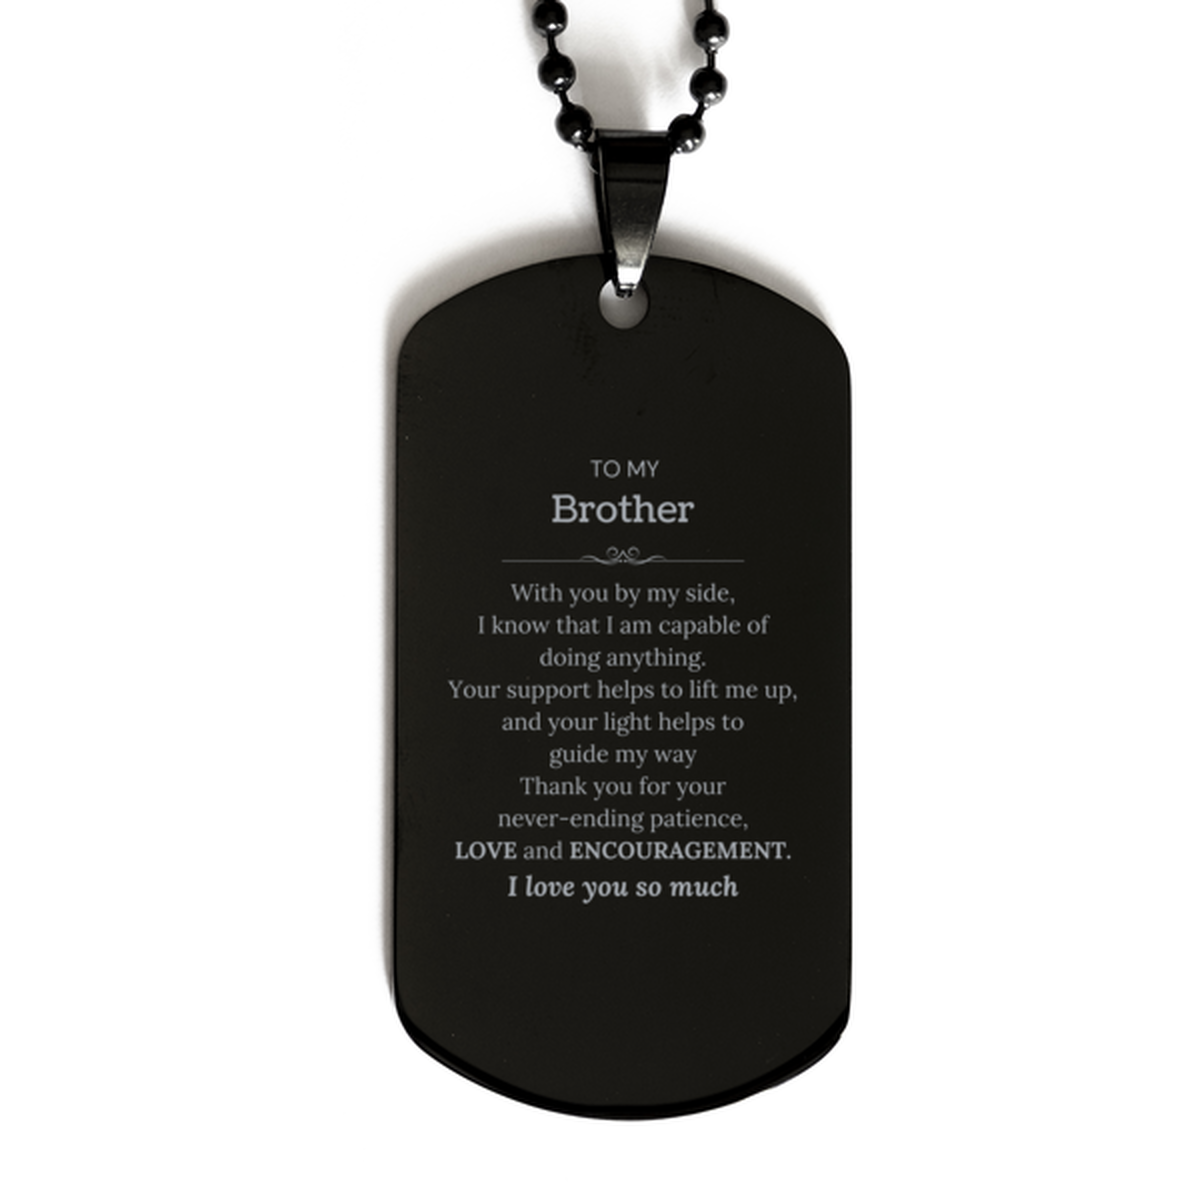 Appreciation Brother Black Dog Tag Gifts, To My Brother Birthday Christmas Wedding Keepsake Gifts for Brother With you by my side, I know that I am capable of doing anything. I love you so much